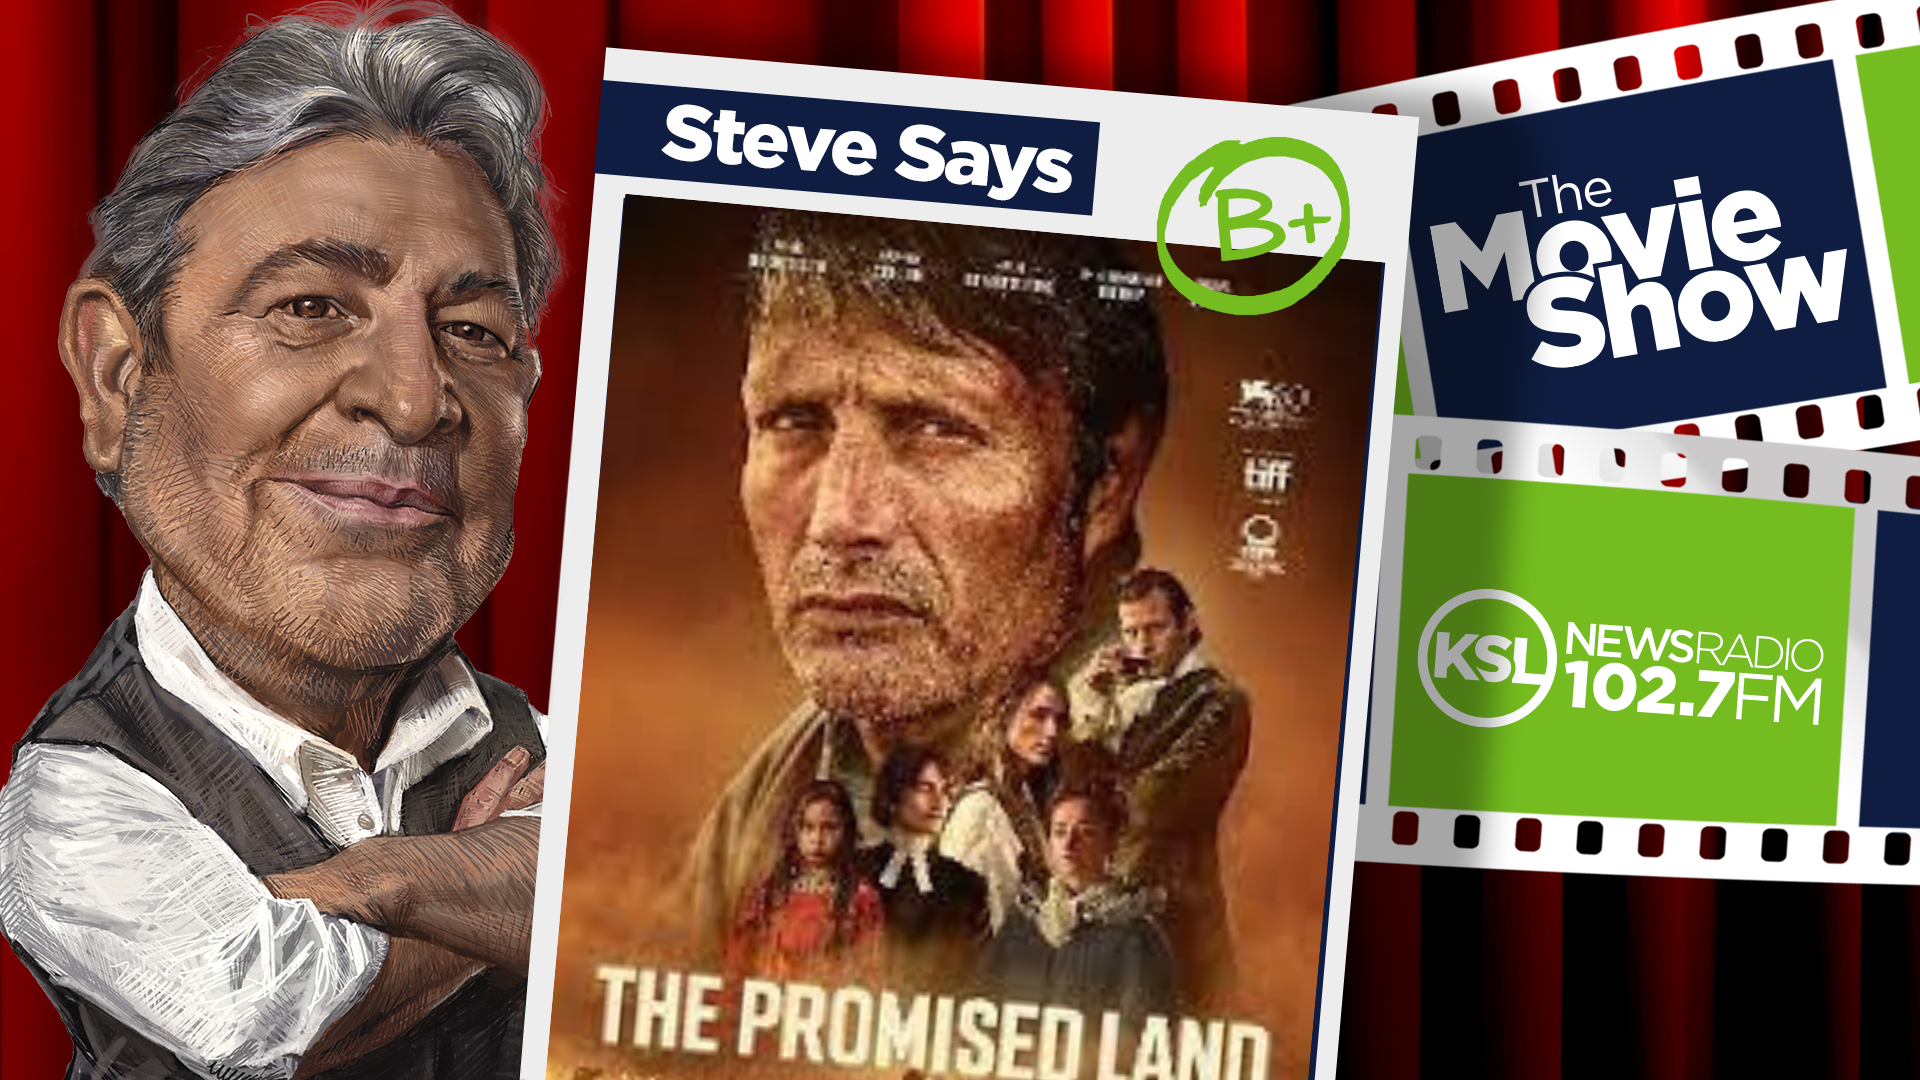 "The Promised Land" movie is packed with good storytelling and a fun main character....